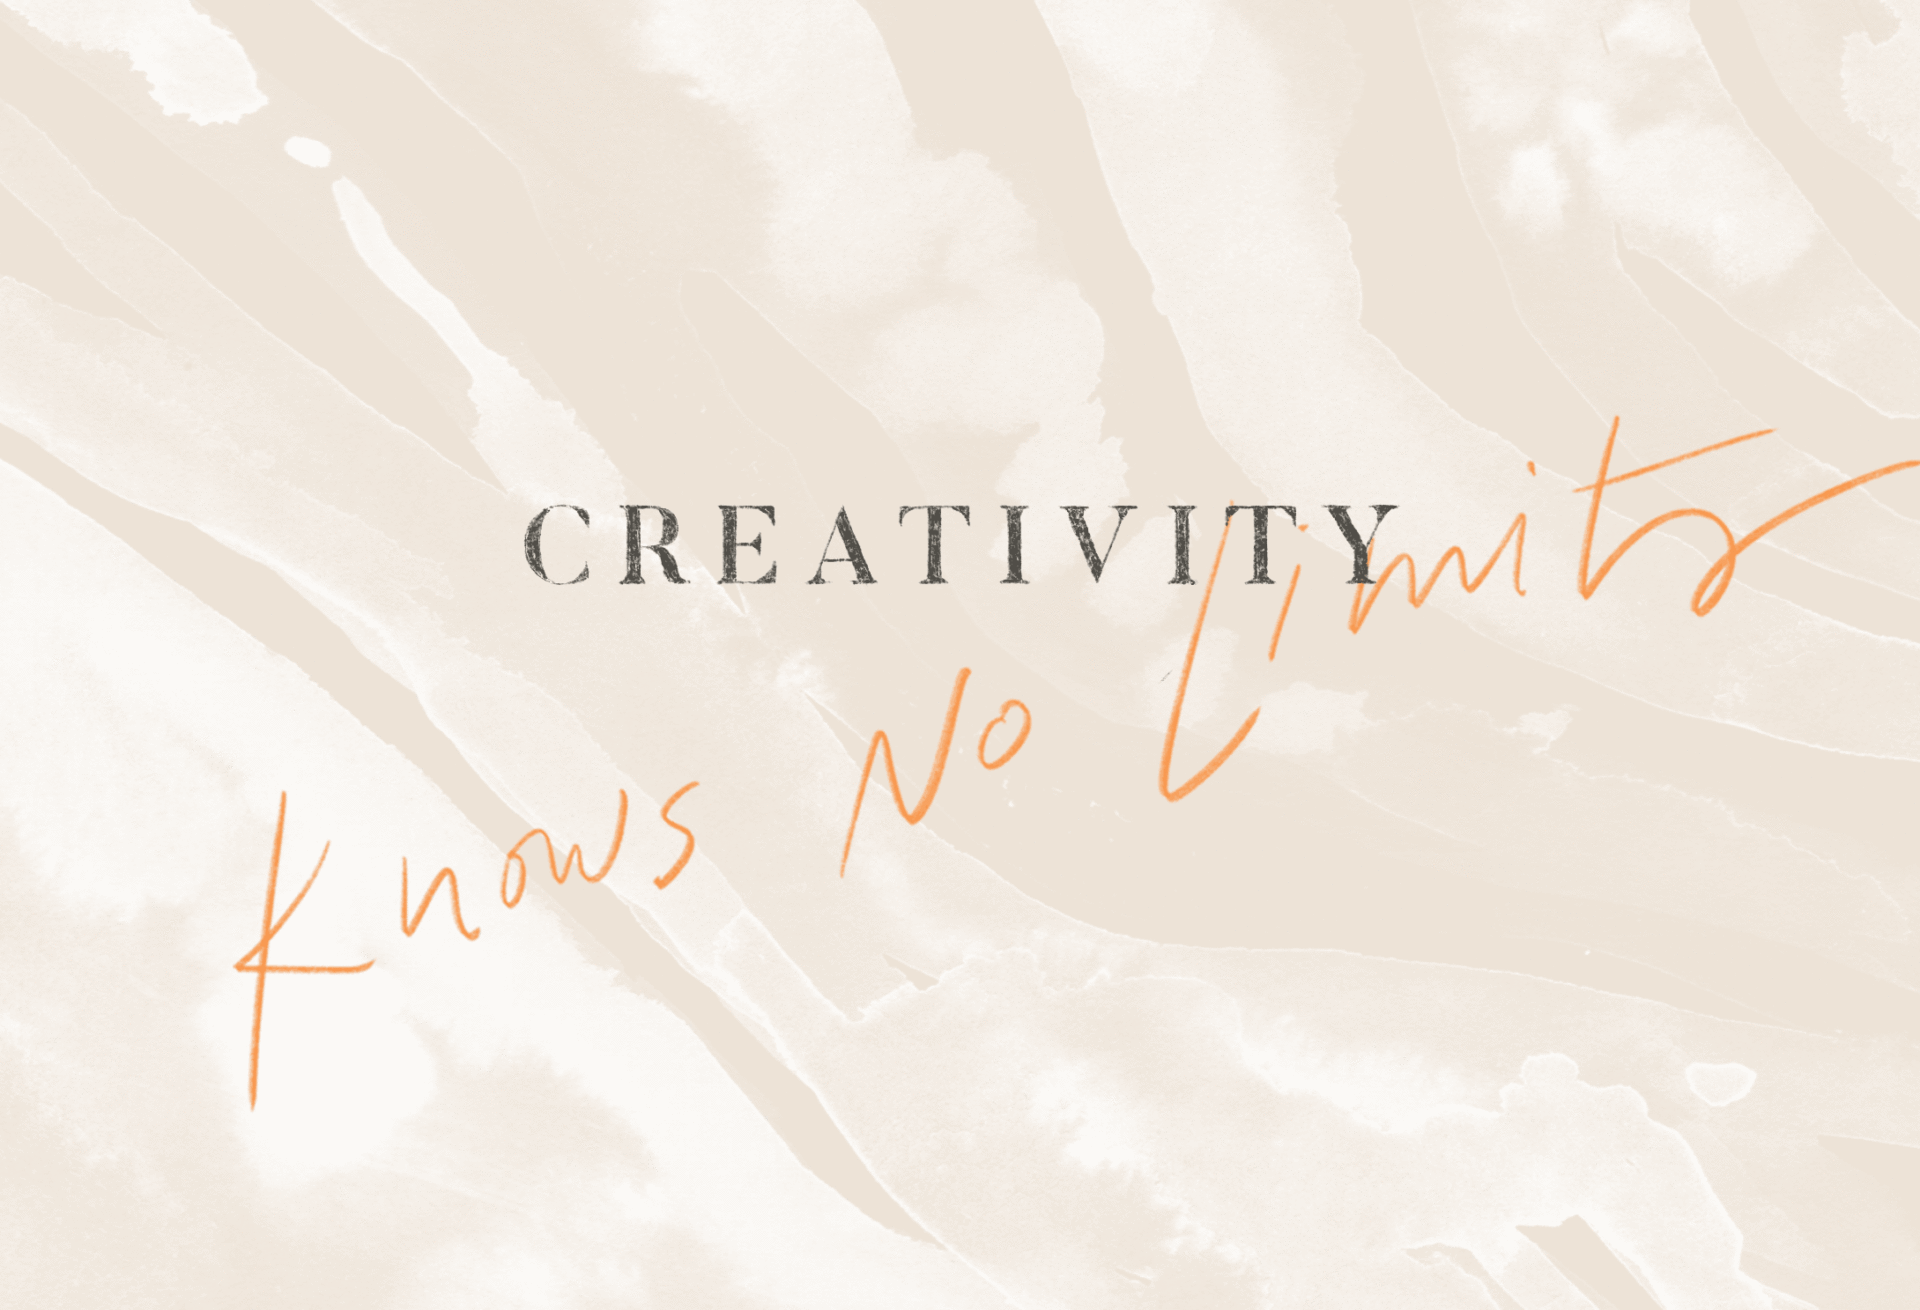 Creativity-Knows-No-Limits-Breaking-The-Mold-Featured-02